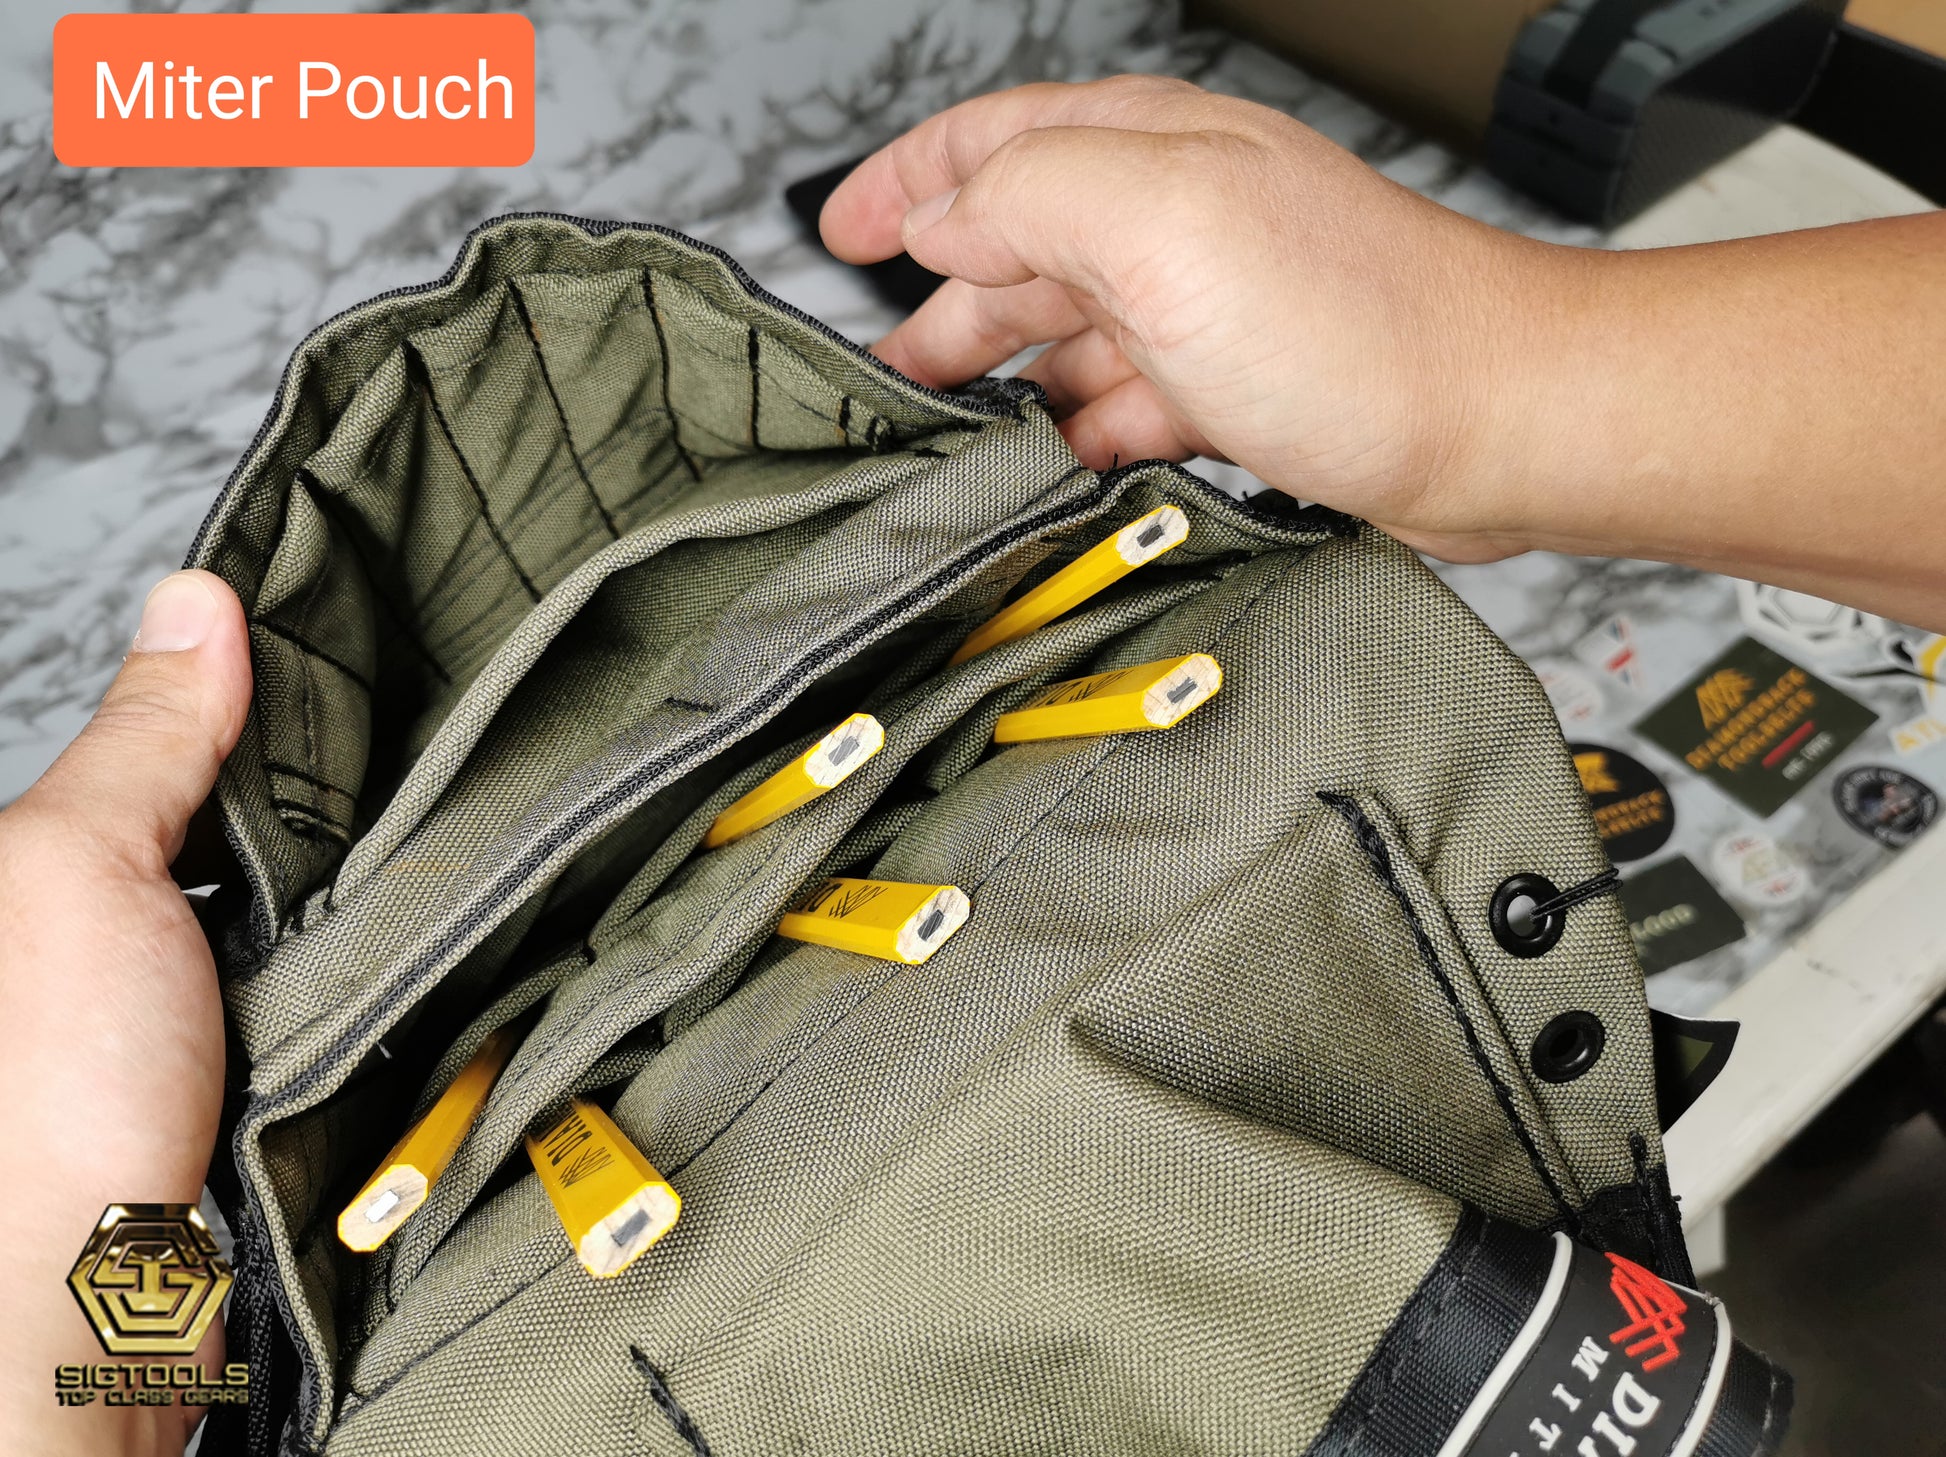 "Diamondback Miter Pouch Loaded with Pencil - Top View"